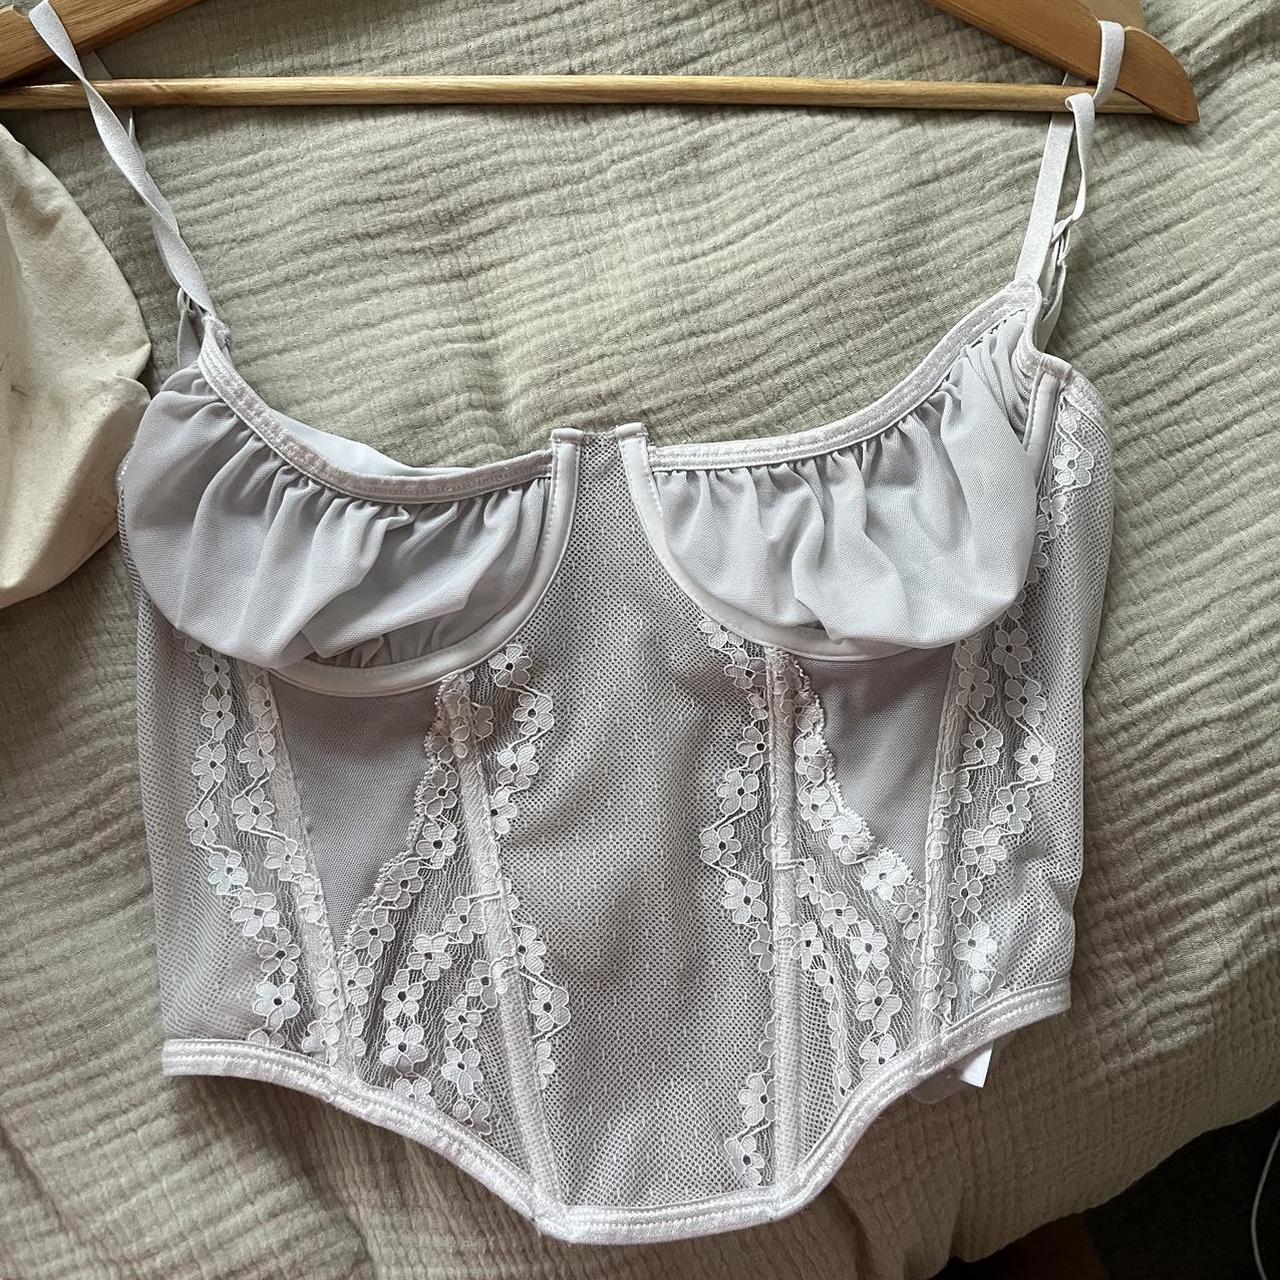 Glassons white lace corset top - Depop